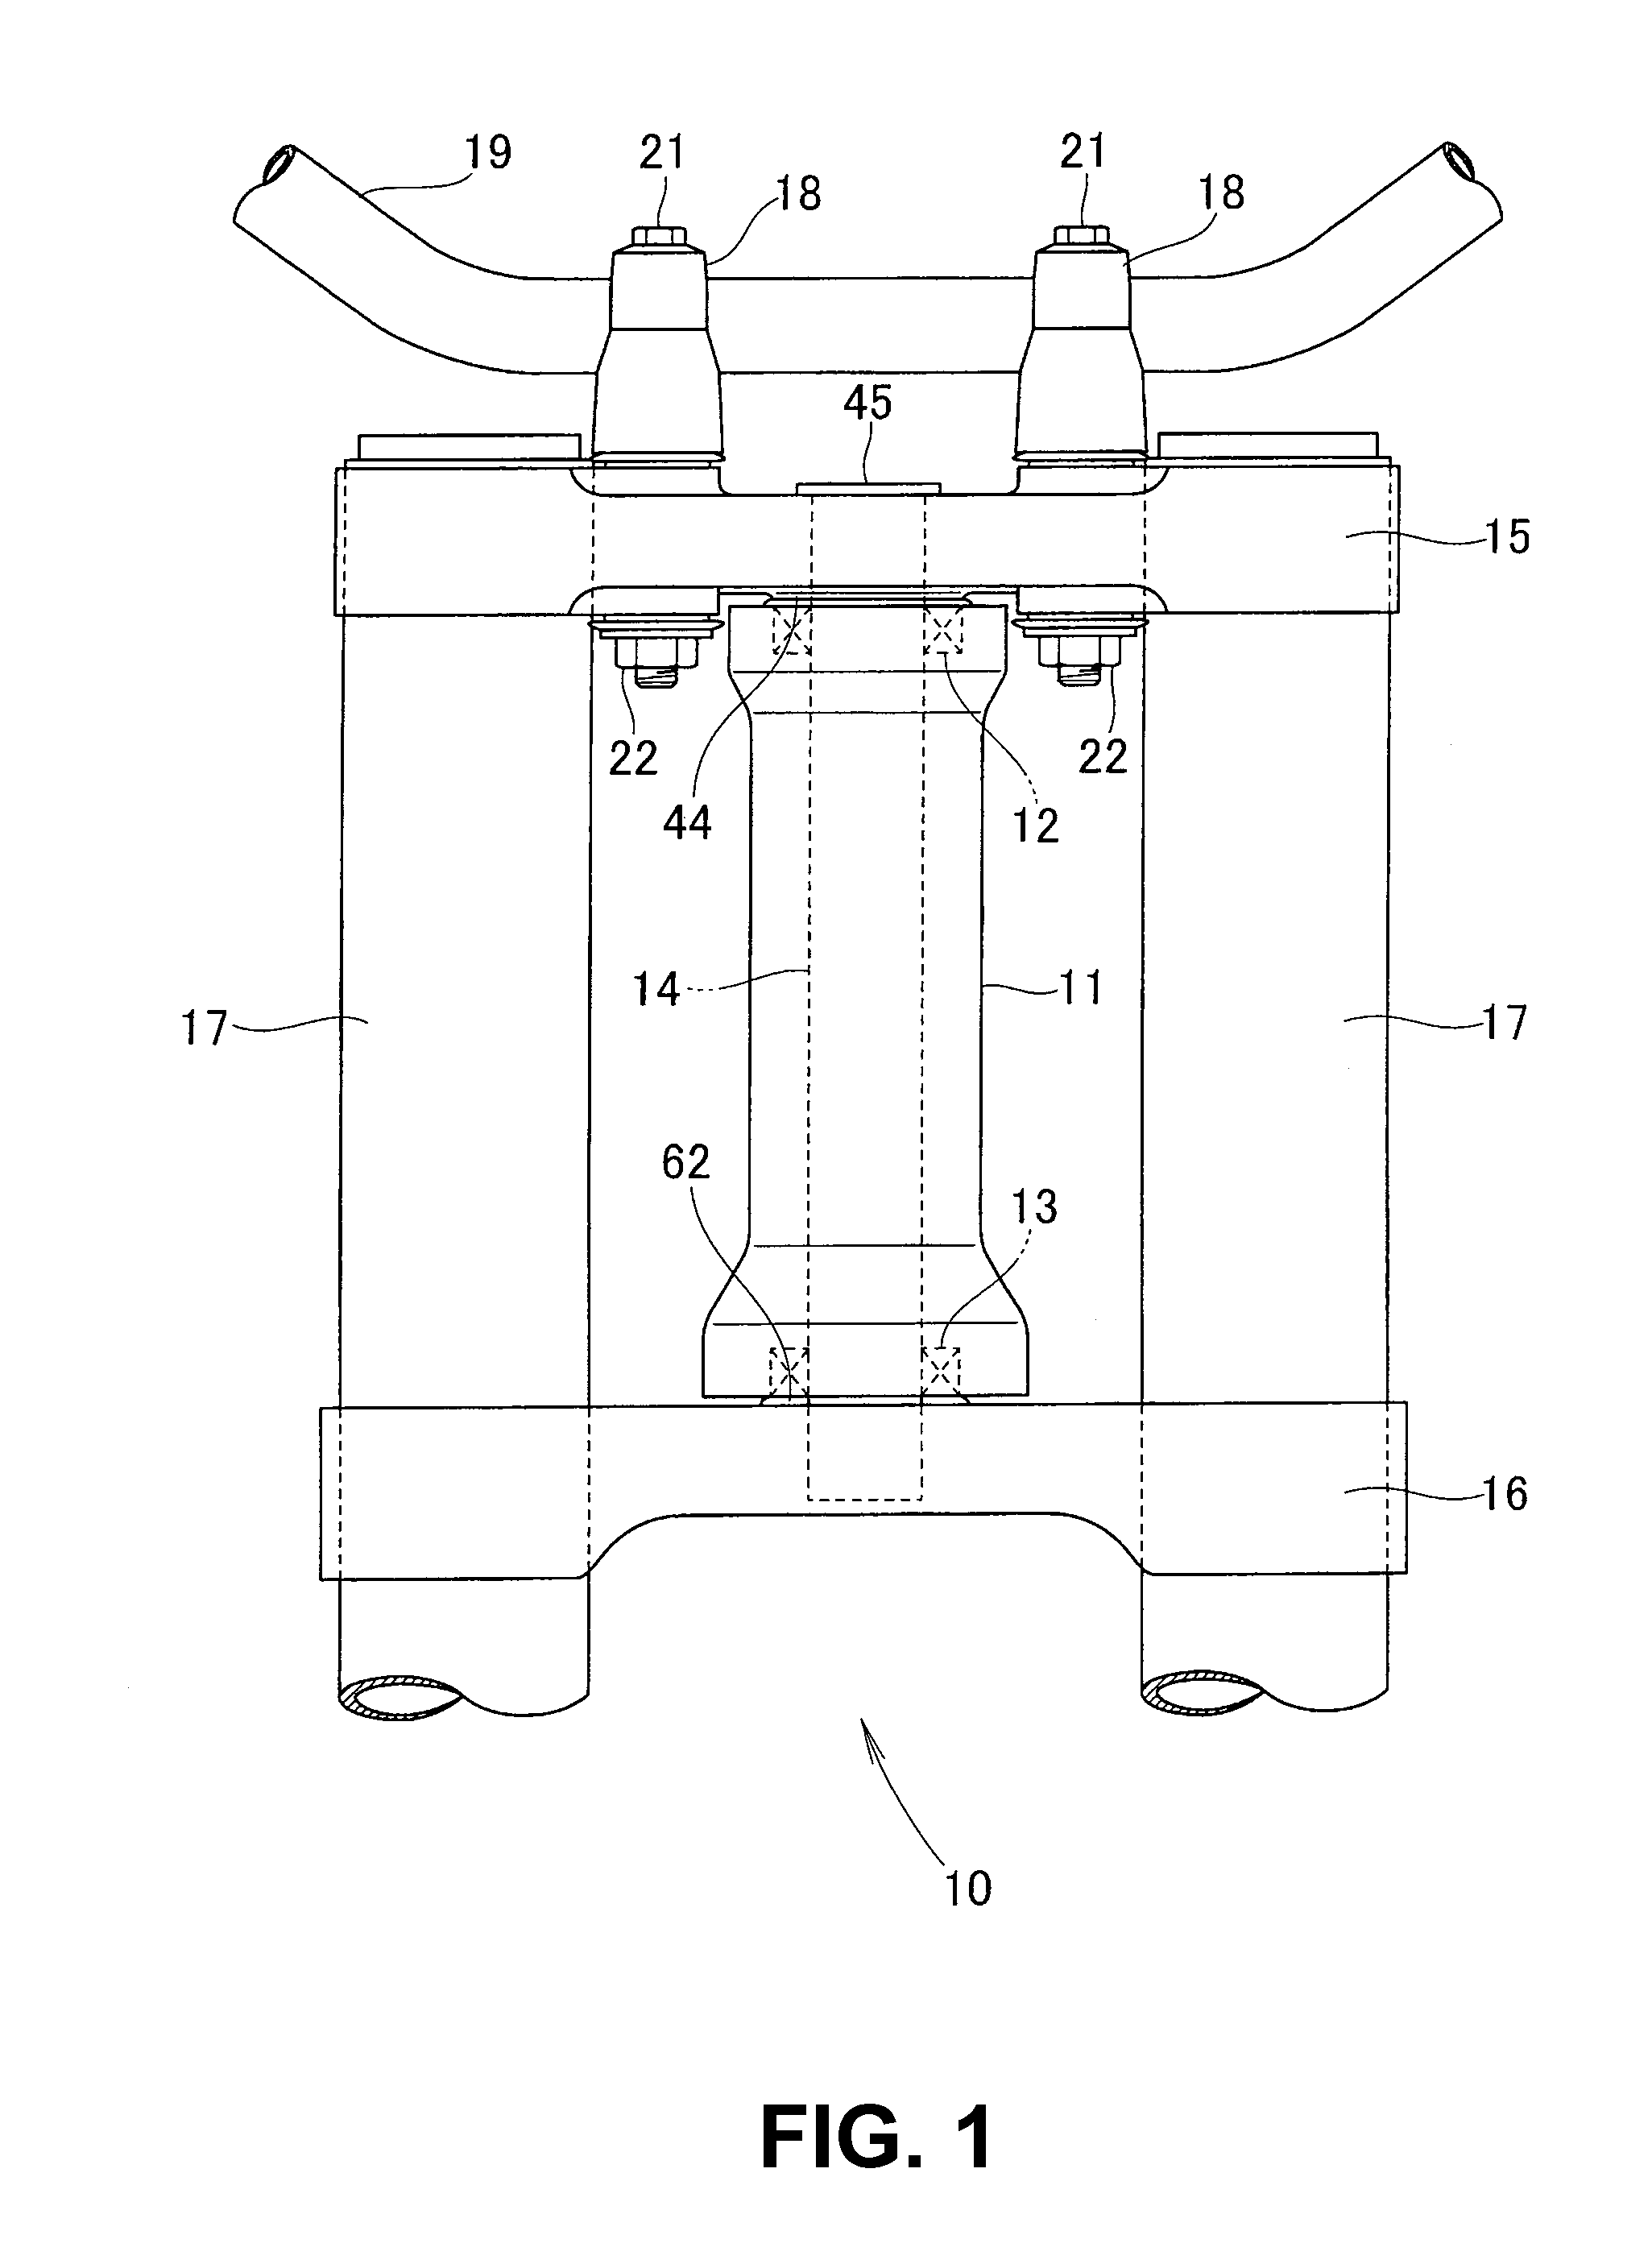 Steering apparatus for a vehicle